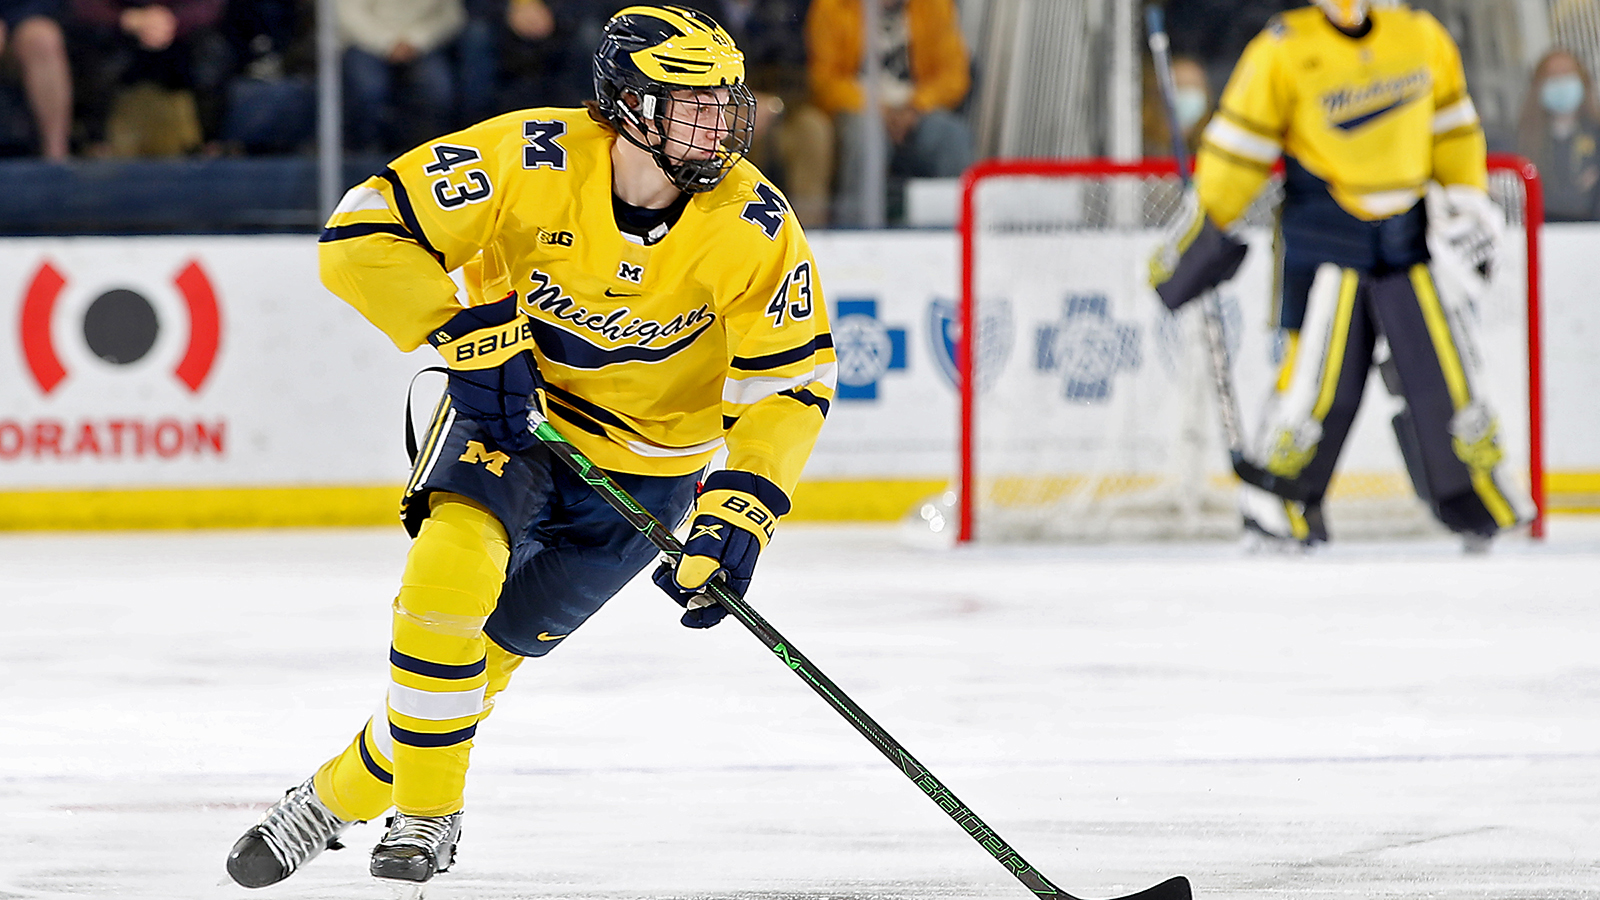 Michigan Hockey on X: With the 4th pick in the first round of the